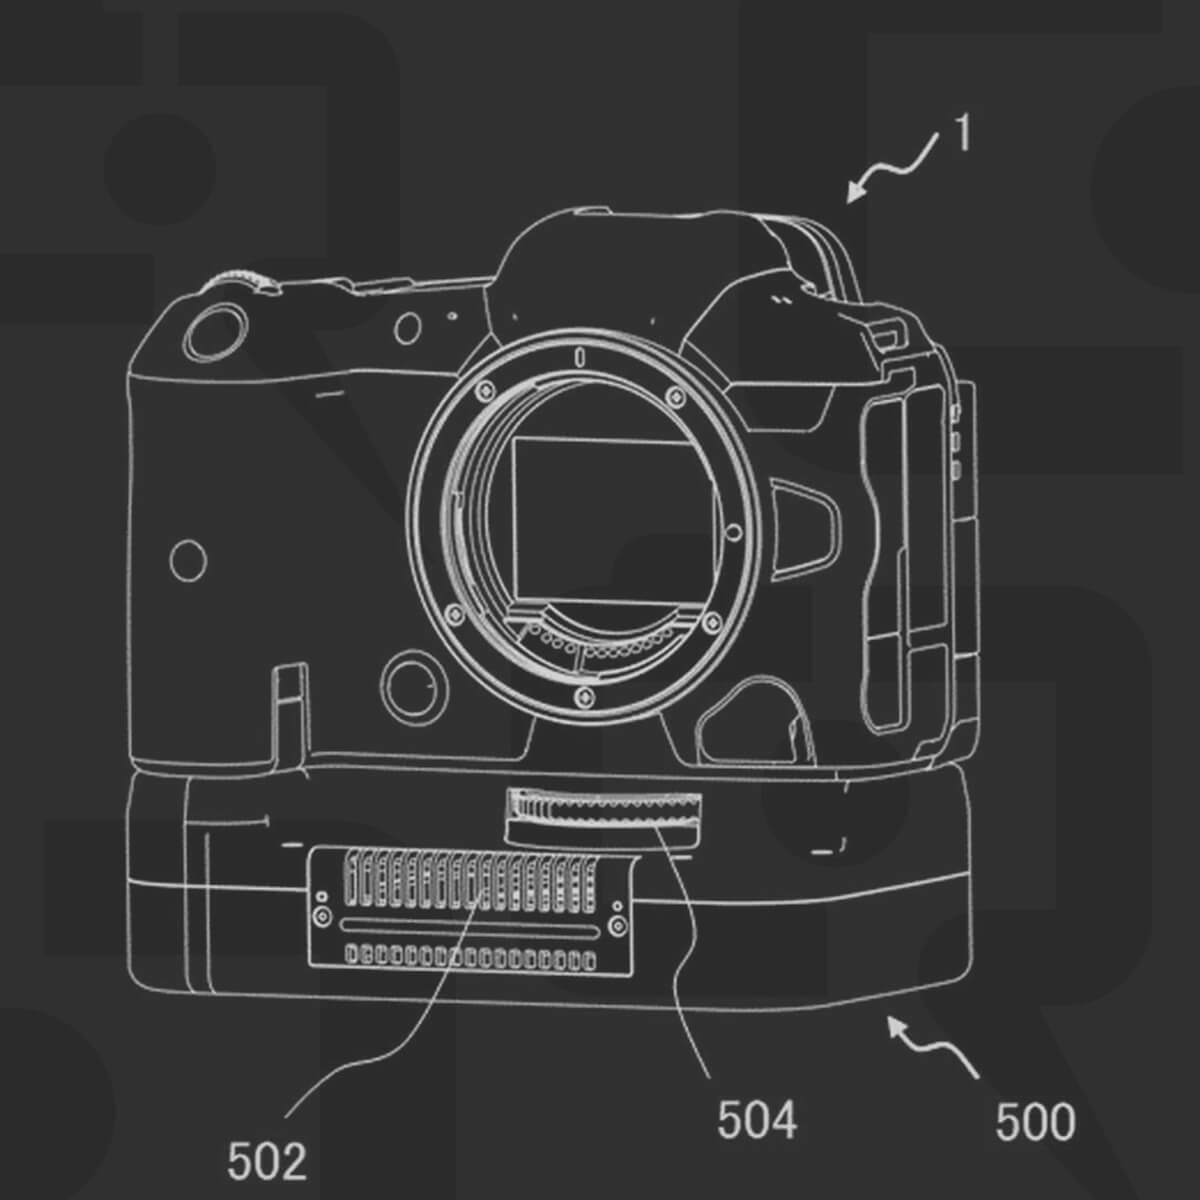 2022030864 02 - Patent: Is an active cooling grip accessory coming from Canon?